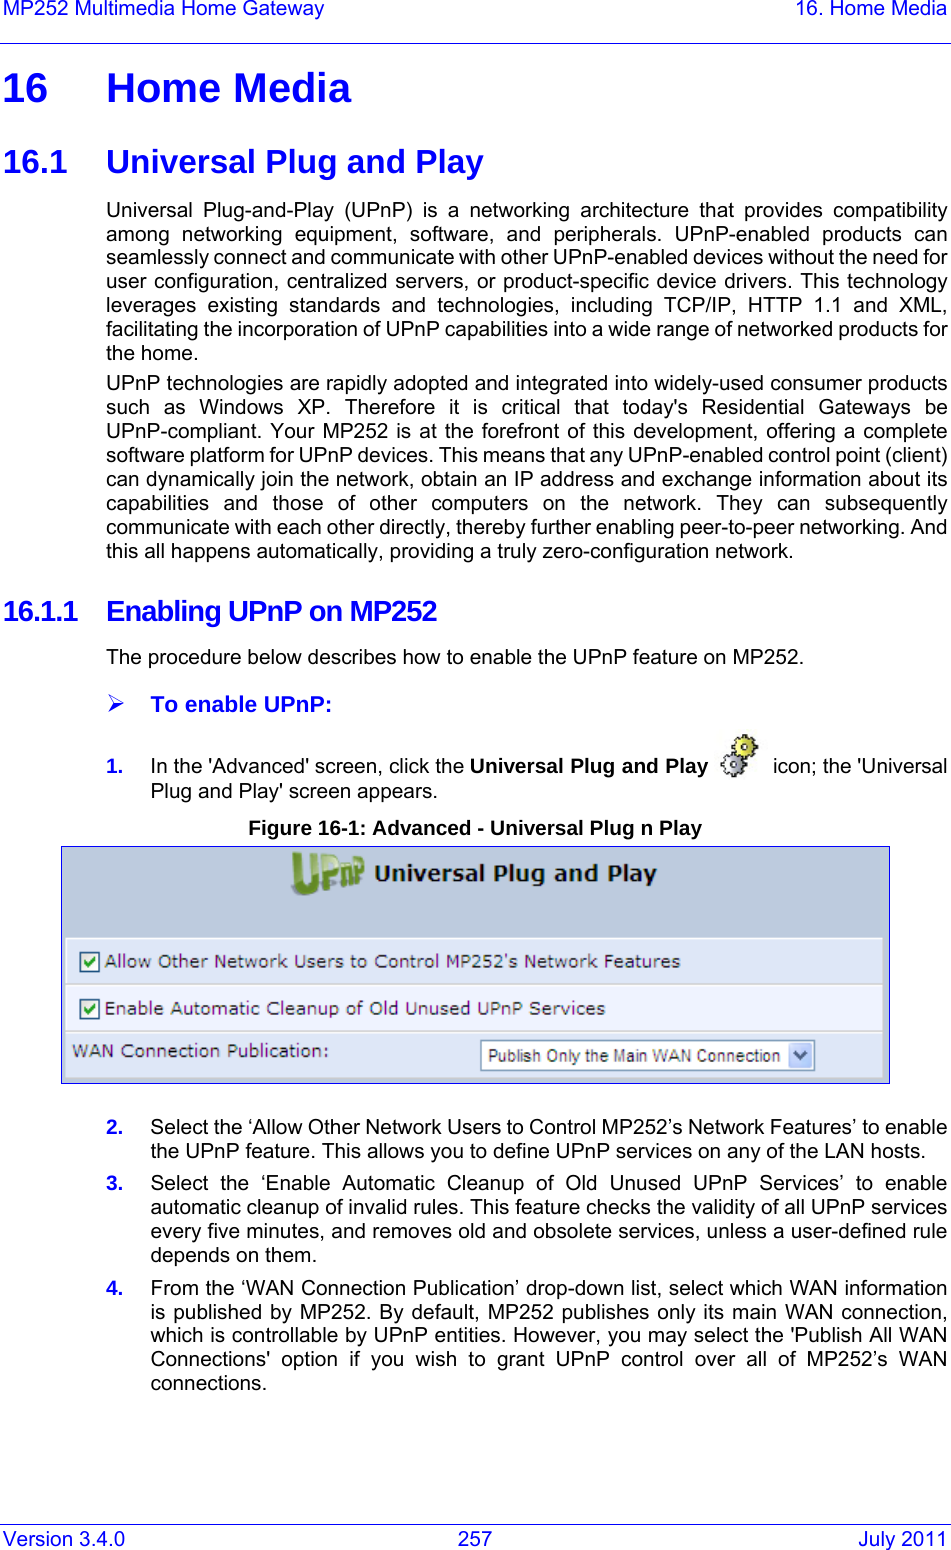 Version 3.4.0  257  July 2011 MP252 Multimedia Home Gateway  16. Home Media 16 Home Media 16.1  Universal Plug and Play Universal Plug-and-Play (UPnP) is a networking architecture that provides compatibility among networking equipment, software, and peripherals. UPnP-enabled products can seamlessly connect and communicate with other UPnP-enabled devices without the need for user configuration, centralized servers, or product-specific device drivers. This technology leverages existing standards and technologies, including TCP/IP, HTTP 1.1 and XML, facilitating the incorporation of UPnP capabilities into a wide range of networked products for the home.  UPnP technologies are rapidly adopted and integrated into widely-used consumer products such as Windows XP. Therefore it is critical that today&apos;s Residential Gateways be UPnP-compliant. Your MP252 is at the forefront of this development, offering a complete software platform for UPnP devices. This means that any UPnP-enabled control point (client) can dynamically join the network, obtain an IP address and exchange information about its capabilities and those of other computers on the network. They can subsequently communicate with each other directly, thereby further enabling peer-to-peer networking. And this all happens automatically, providing a truly zero-configuration network. 16.1.1  Enabling UPnP on MP252 The procedure below describes how to enable the UPnP feature on MP252. ¾ To enable UPnP: 1.  In the &apos;Advanced&apos; screen, click the Universal Plug and Play   icon; the &apos;Universal Plug and Play&apos; screen appears. Figure 16-1: Advanced - Universal Plug n Play  2.  Select the ‘Allow Other Network Users to Control MP252’s Network Features’ to enable the UPnP feature. This allows you to define UPnP services on any of the LAN hosts. 3.  Select the ‘Enable Automatic Cleanup of Old Unused UPnP Services’ to enable automatic cleanup of invalid rules. This feature checks the validity of all UPnP services every five minutes, and removes old and obsolete services, unless a user-defined rule depends on them. 4.  From the ‘WAN Connection Publication’ drop-down list, select which WAN information is published by MP252. By default, MP252 publishes only its main WAN connection, which is controllable by UPnP entities. However, you may select the &apos;Publish All WAN Connections&apos; option if you wish to grant UPnP control over all of MP252’s WAN connections.  